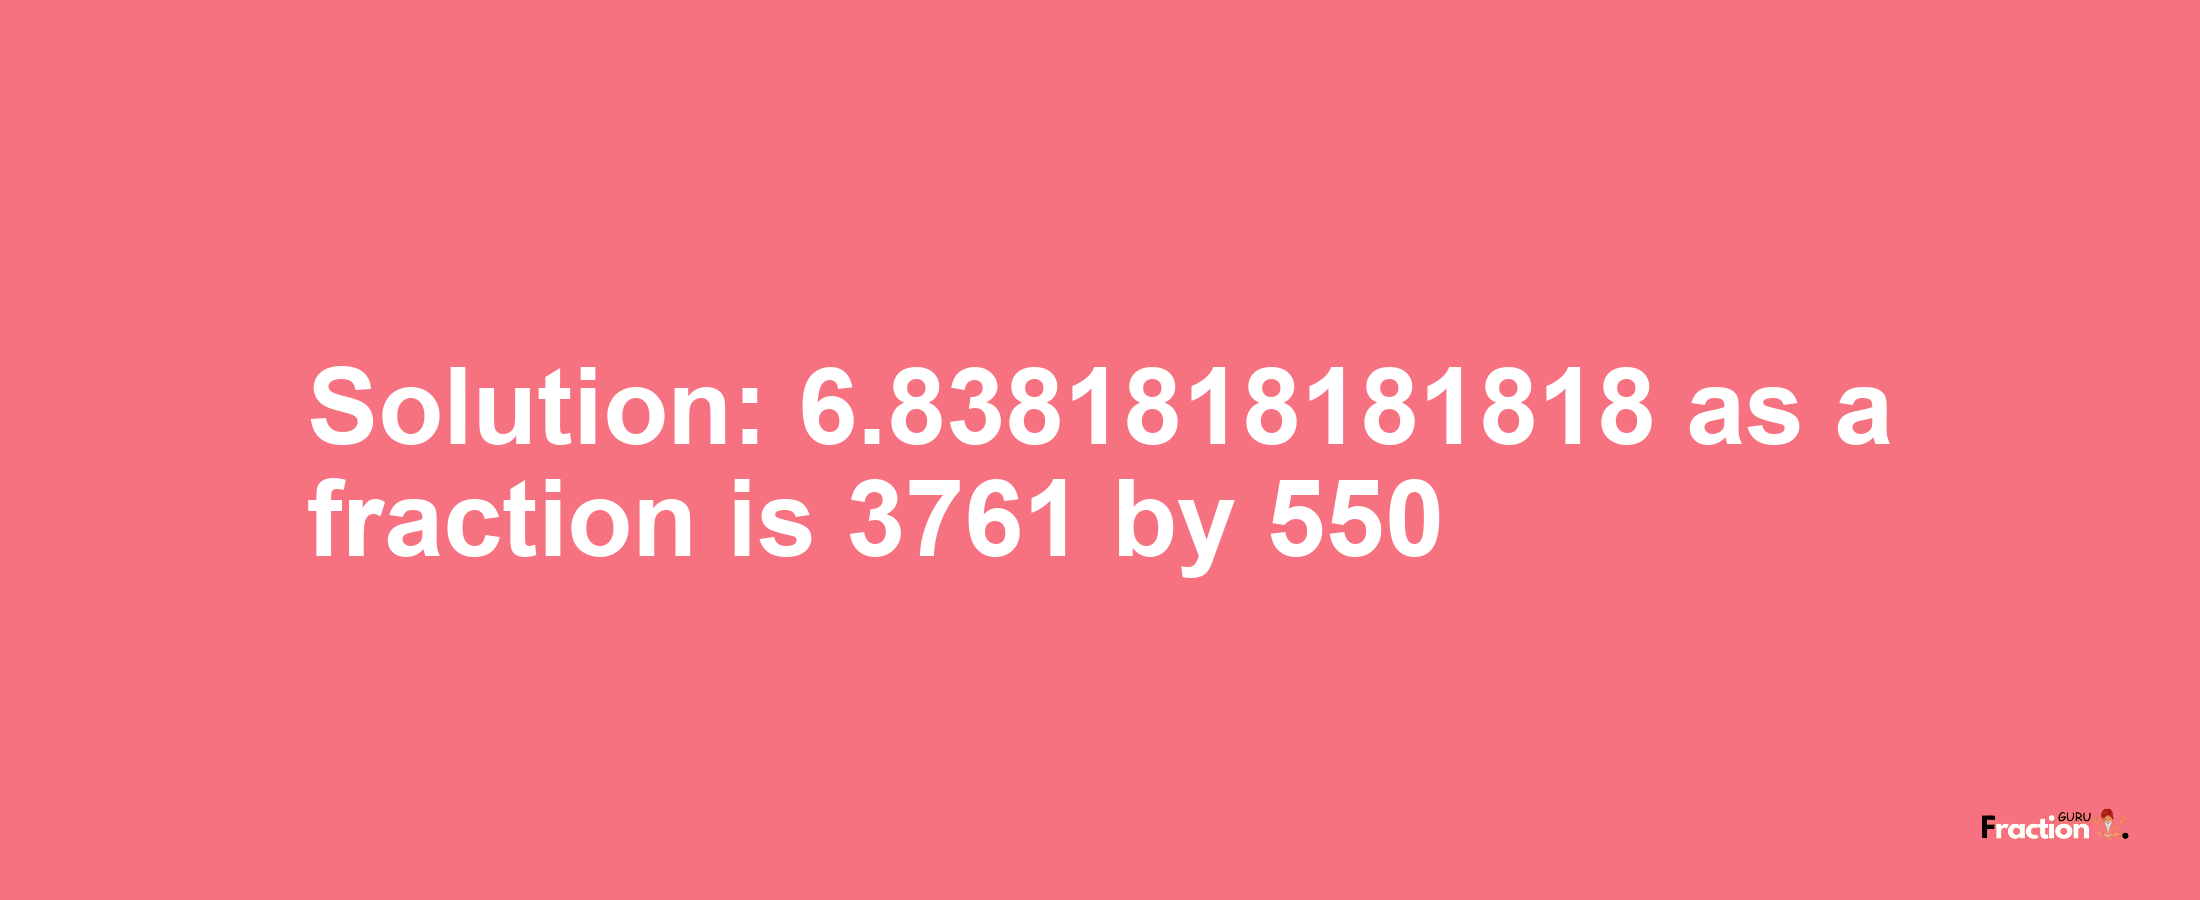 Solution:6.8381818181818 as a fraction is 3761/550